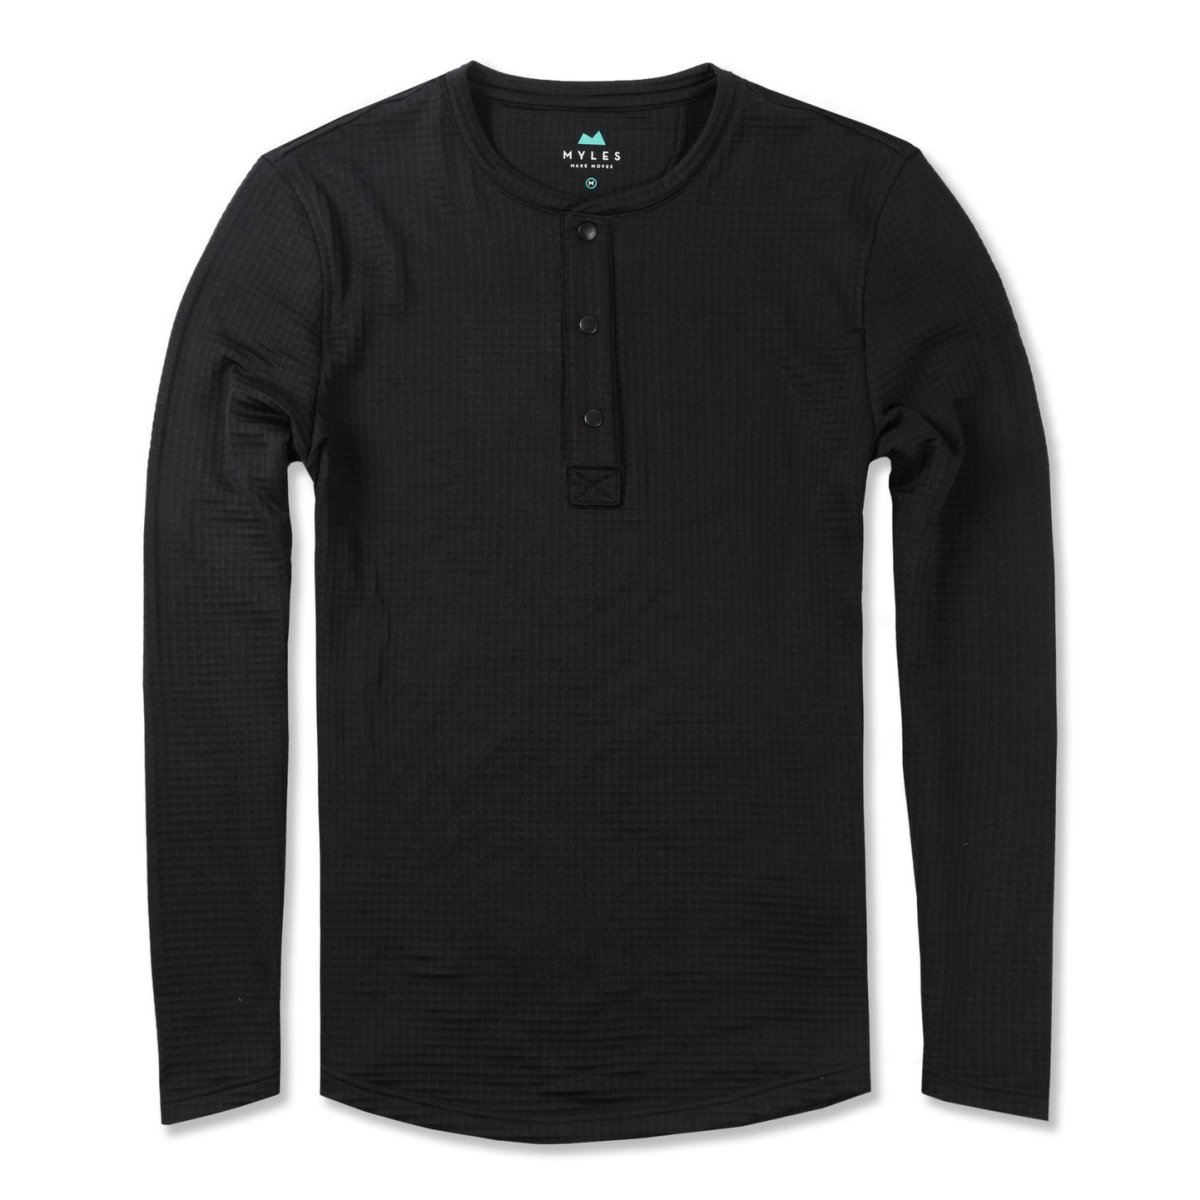 Elements_Henley_Charcoal_Front_1442x